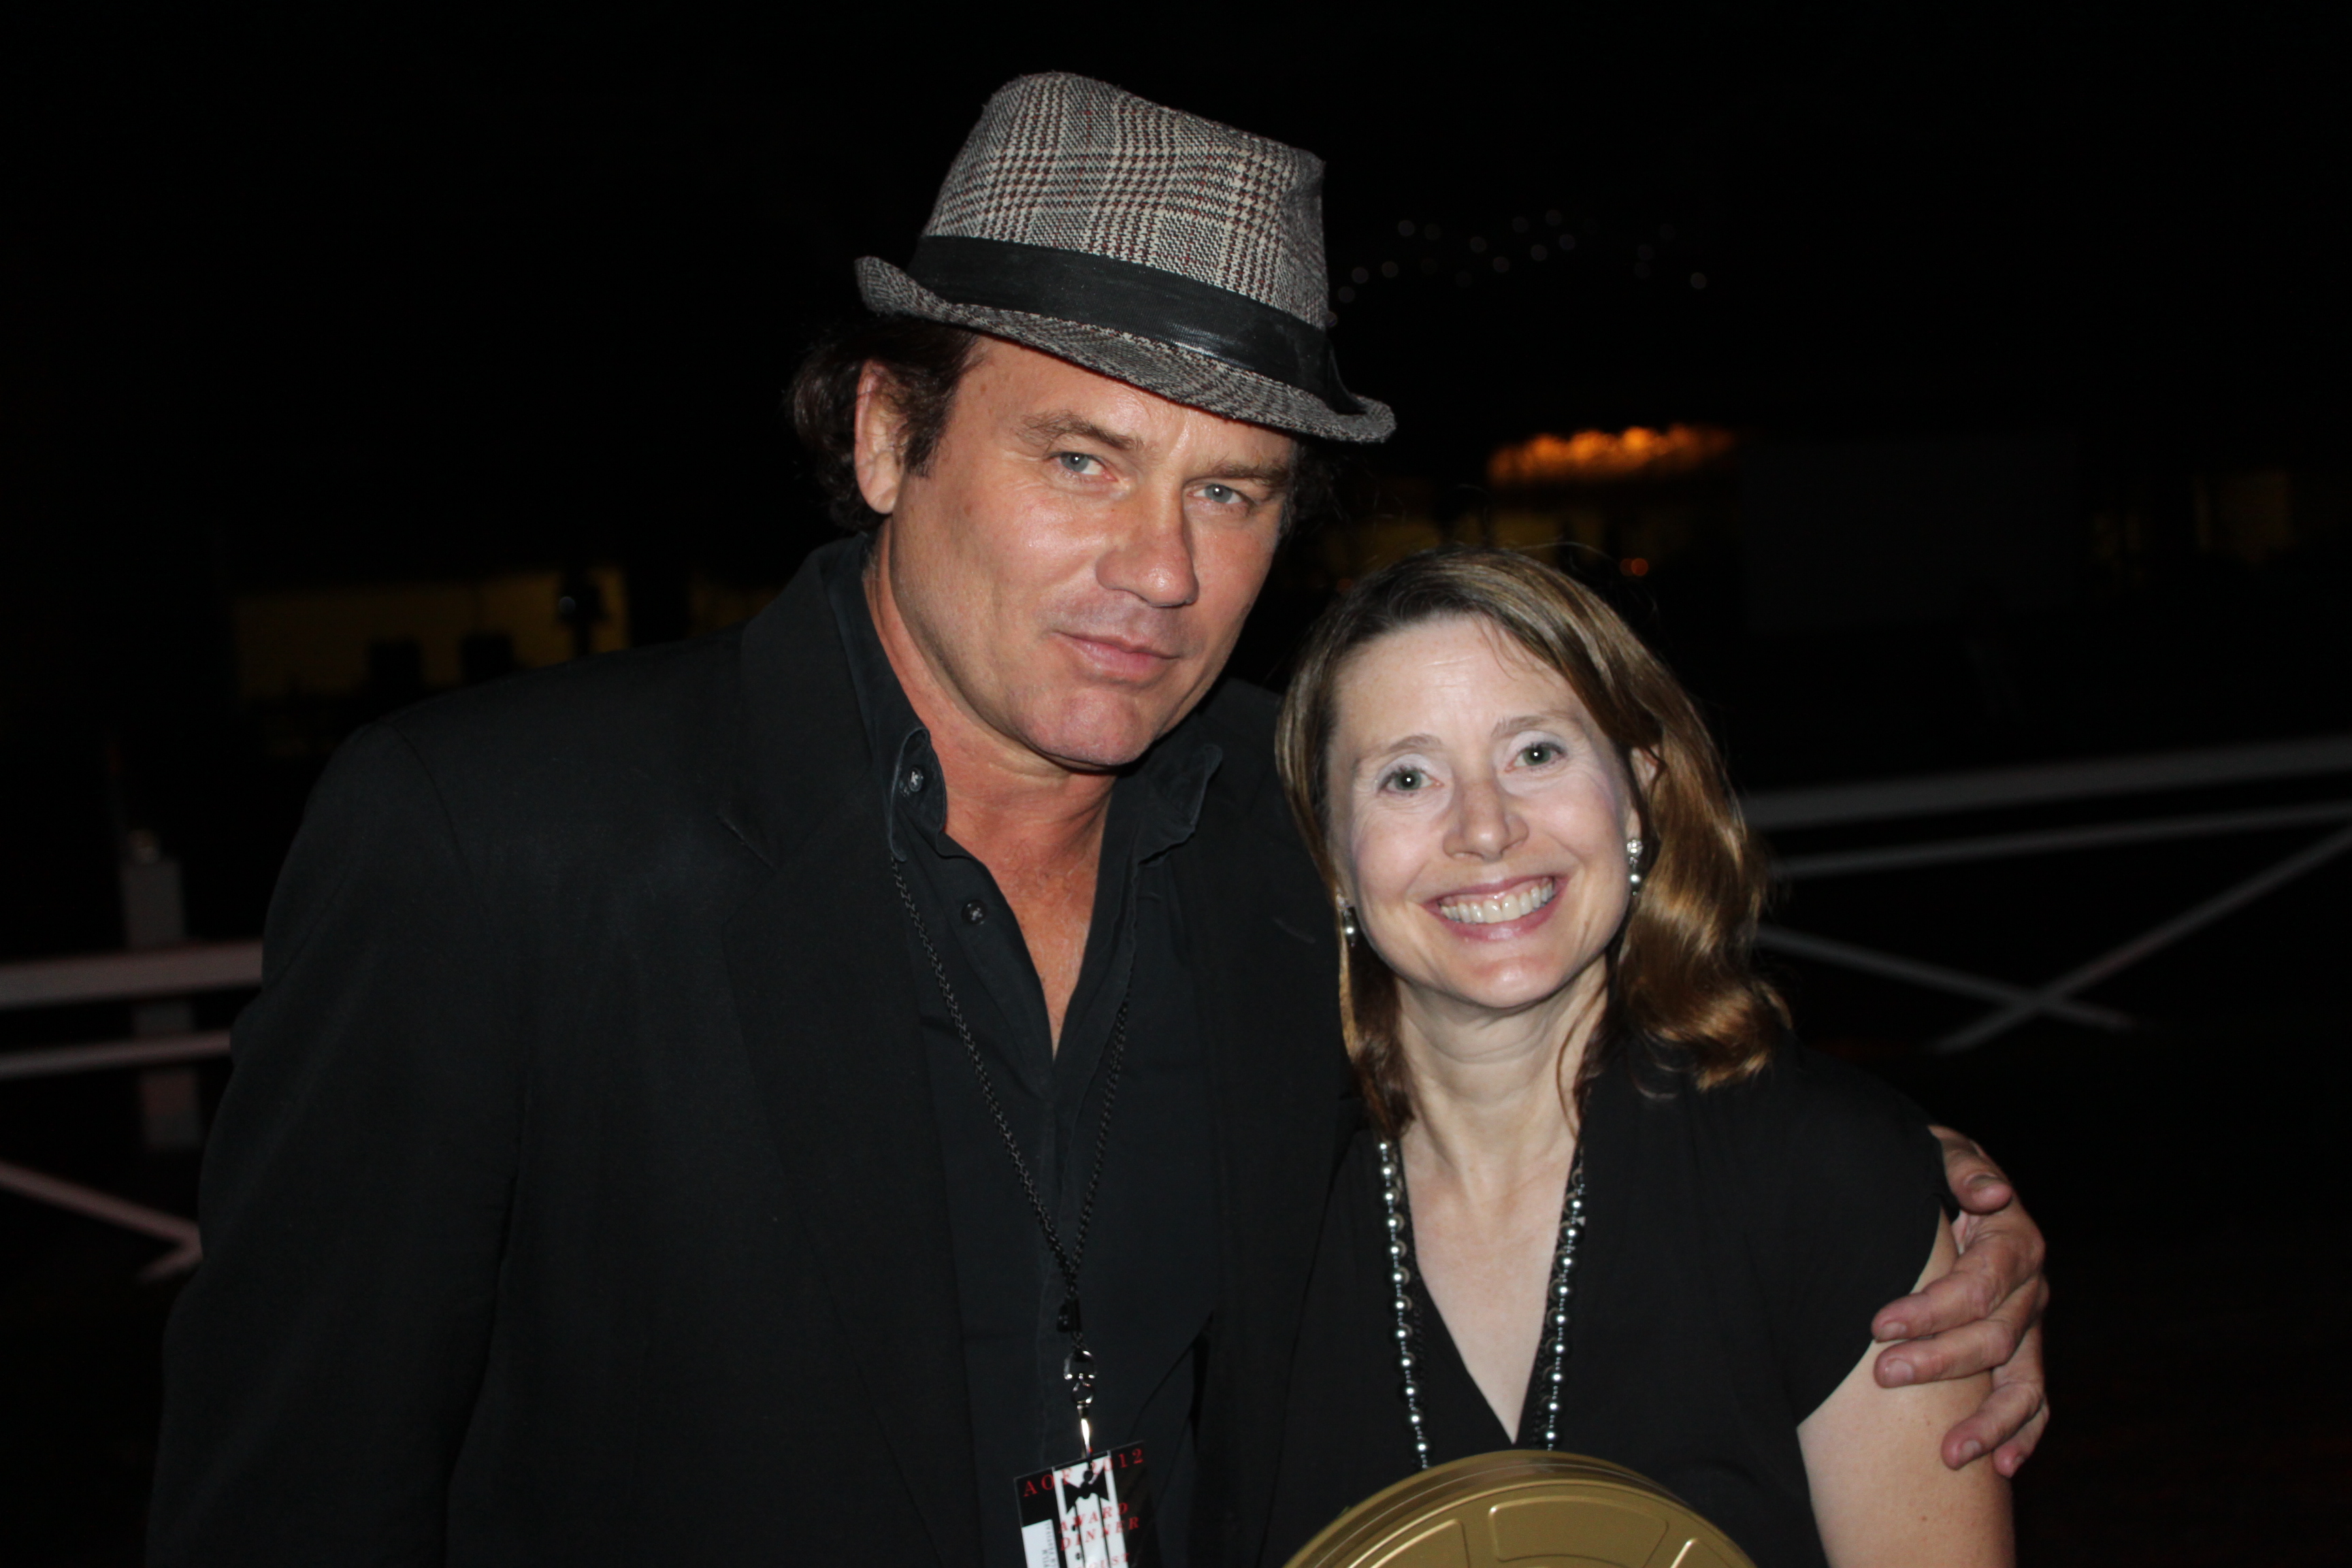 Colleen with Richard Tyson at the AOF Black Tie event at Santa Anita. She won the Write Bros. Excellence in Comedy award for her feature Romantic Comedy script 